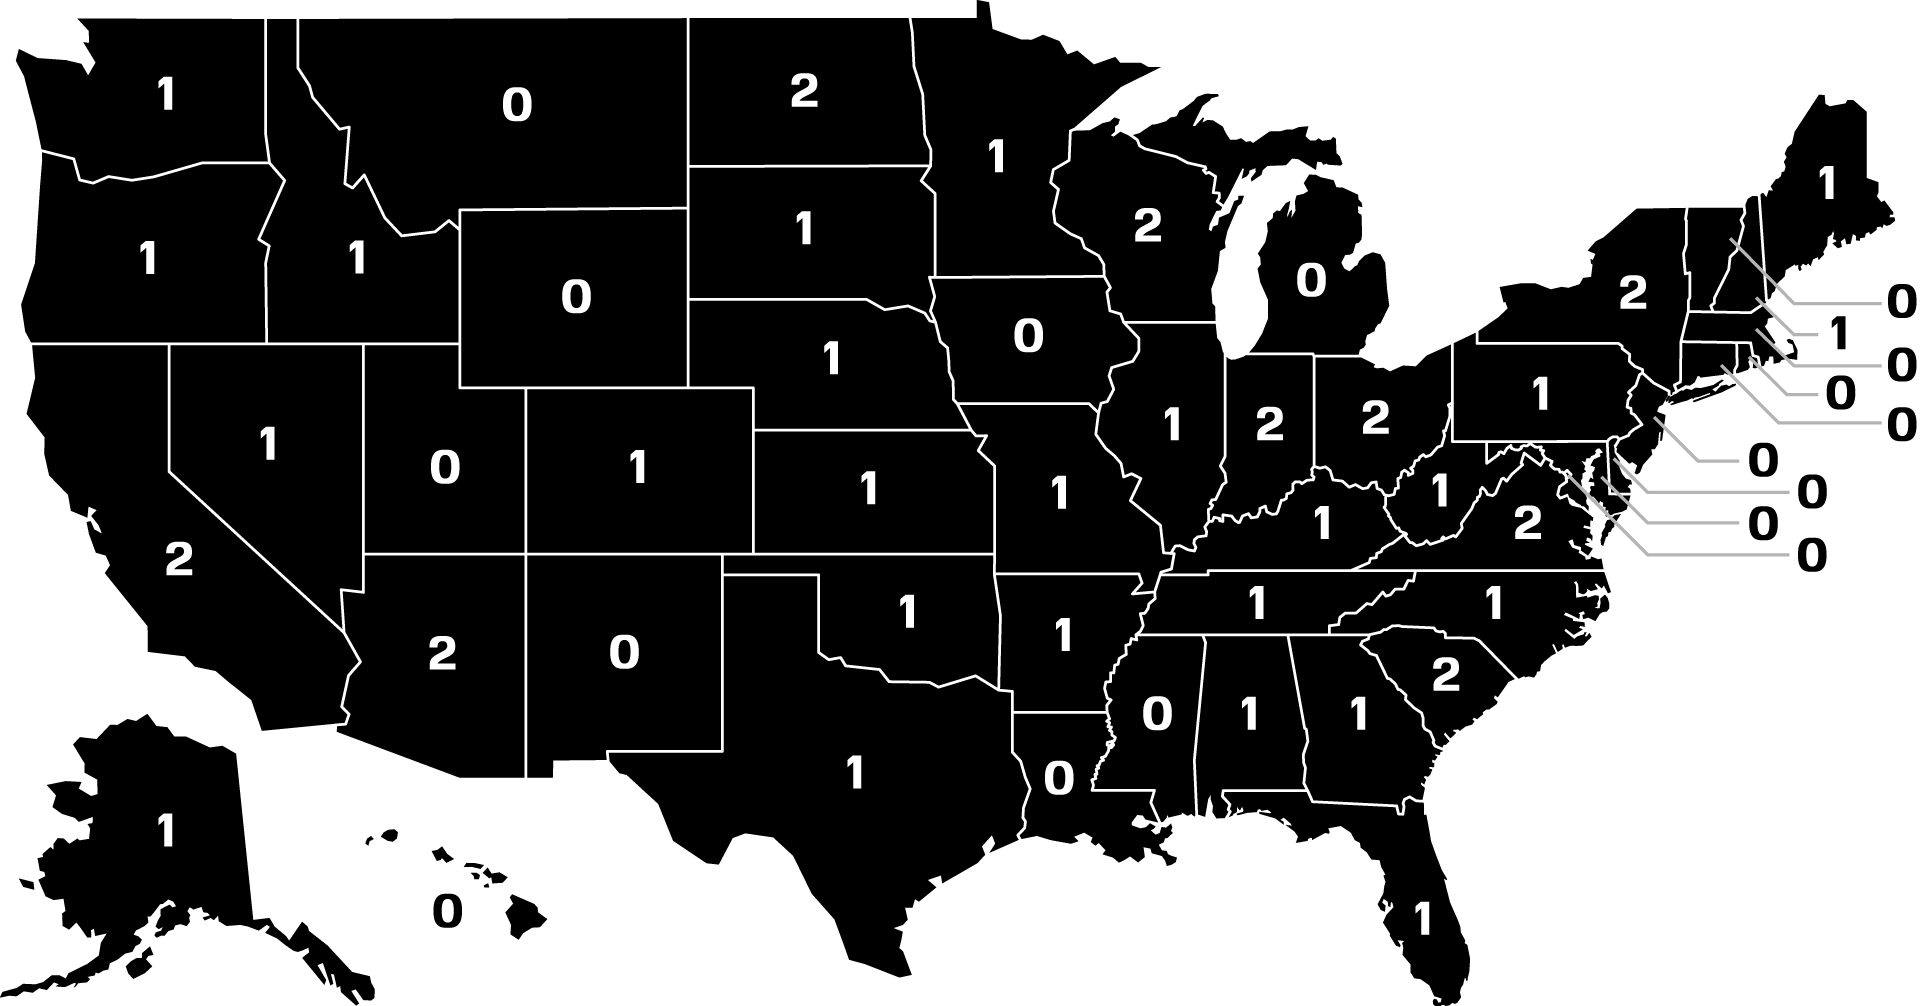 Outline map of US states with number of Neo Volkisch groups